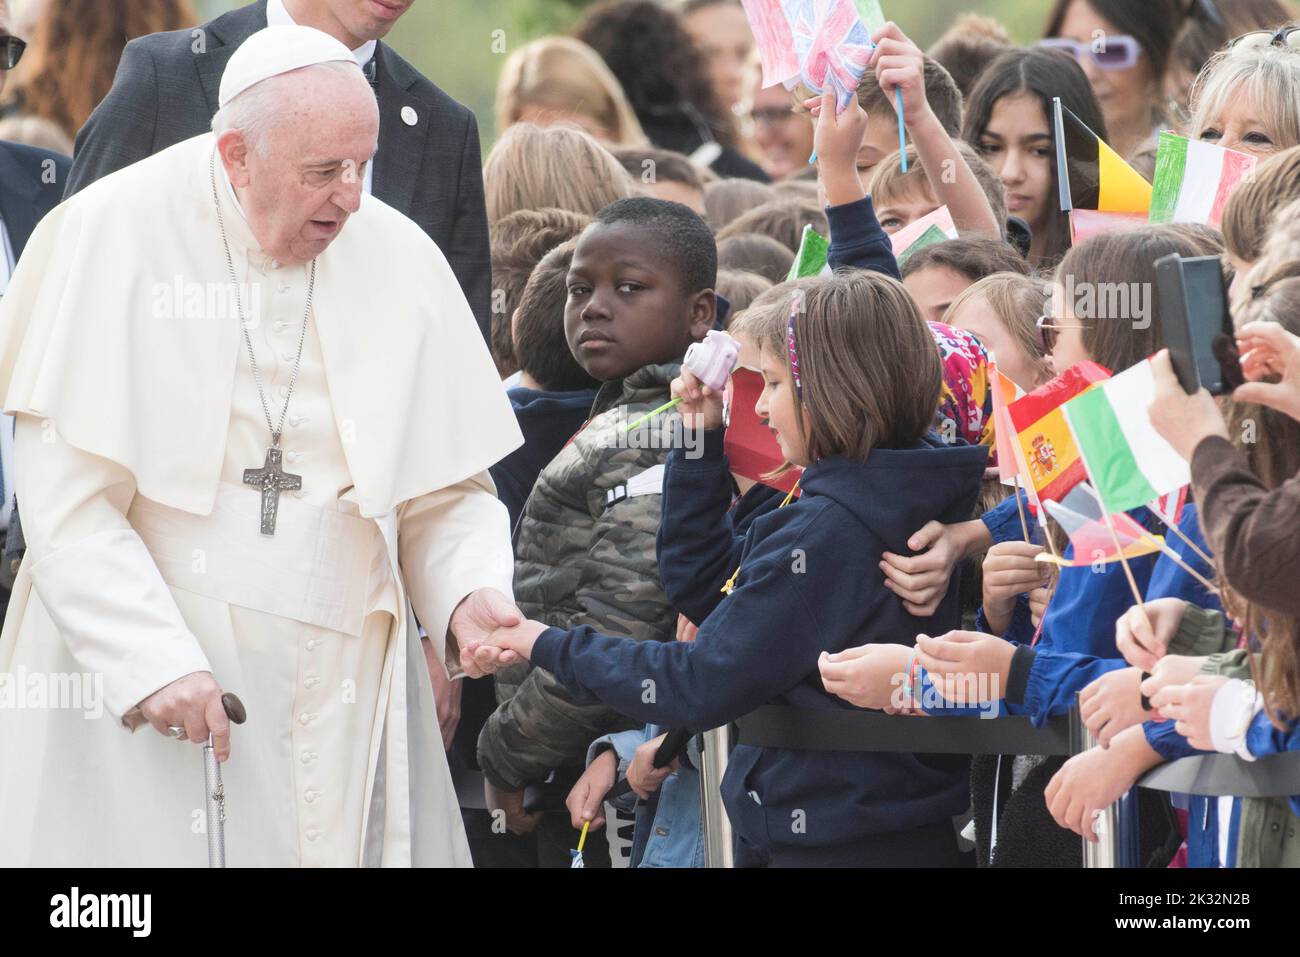 Assisi, Italy. 24th Sep, 2022. Italy, Assisi, Vatican, 22/09/24 Pope Francis meets with youth as he arrives to attend the Economy of Francesco (EoF) event on September 24, 2022 in Assisi, central Italy. EoF is a process called for by the Pope to lay foundations for a new economy.Photograph by Andrea Colarieti /Catholic Press Photo. RESTRICTED TO EDITORIAL USE - NO MARKETING - NO ADVERTISING CAMPAIGNS Credit: Independent Photo Agency/Alamy Live News Stock Photo